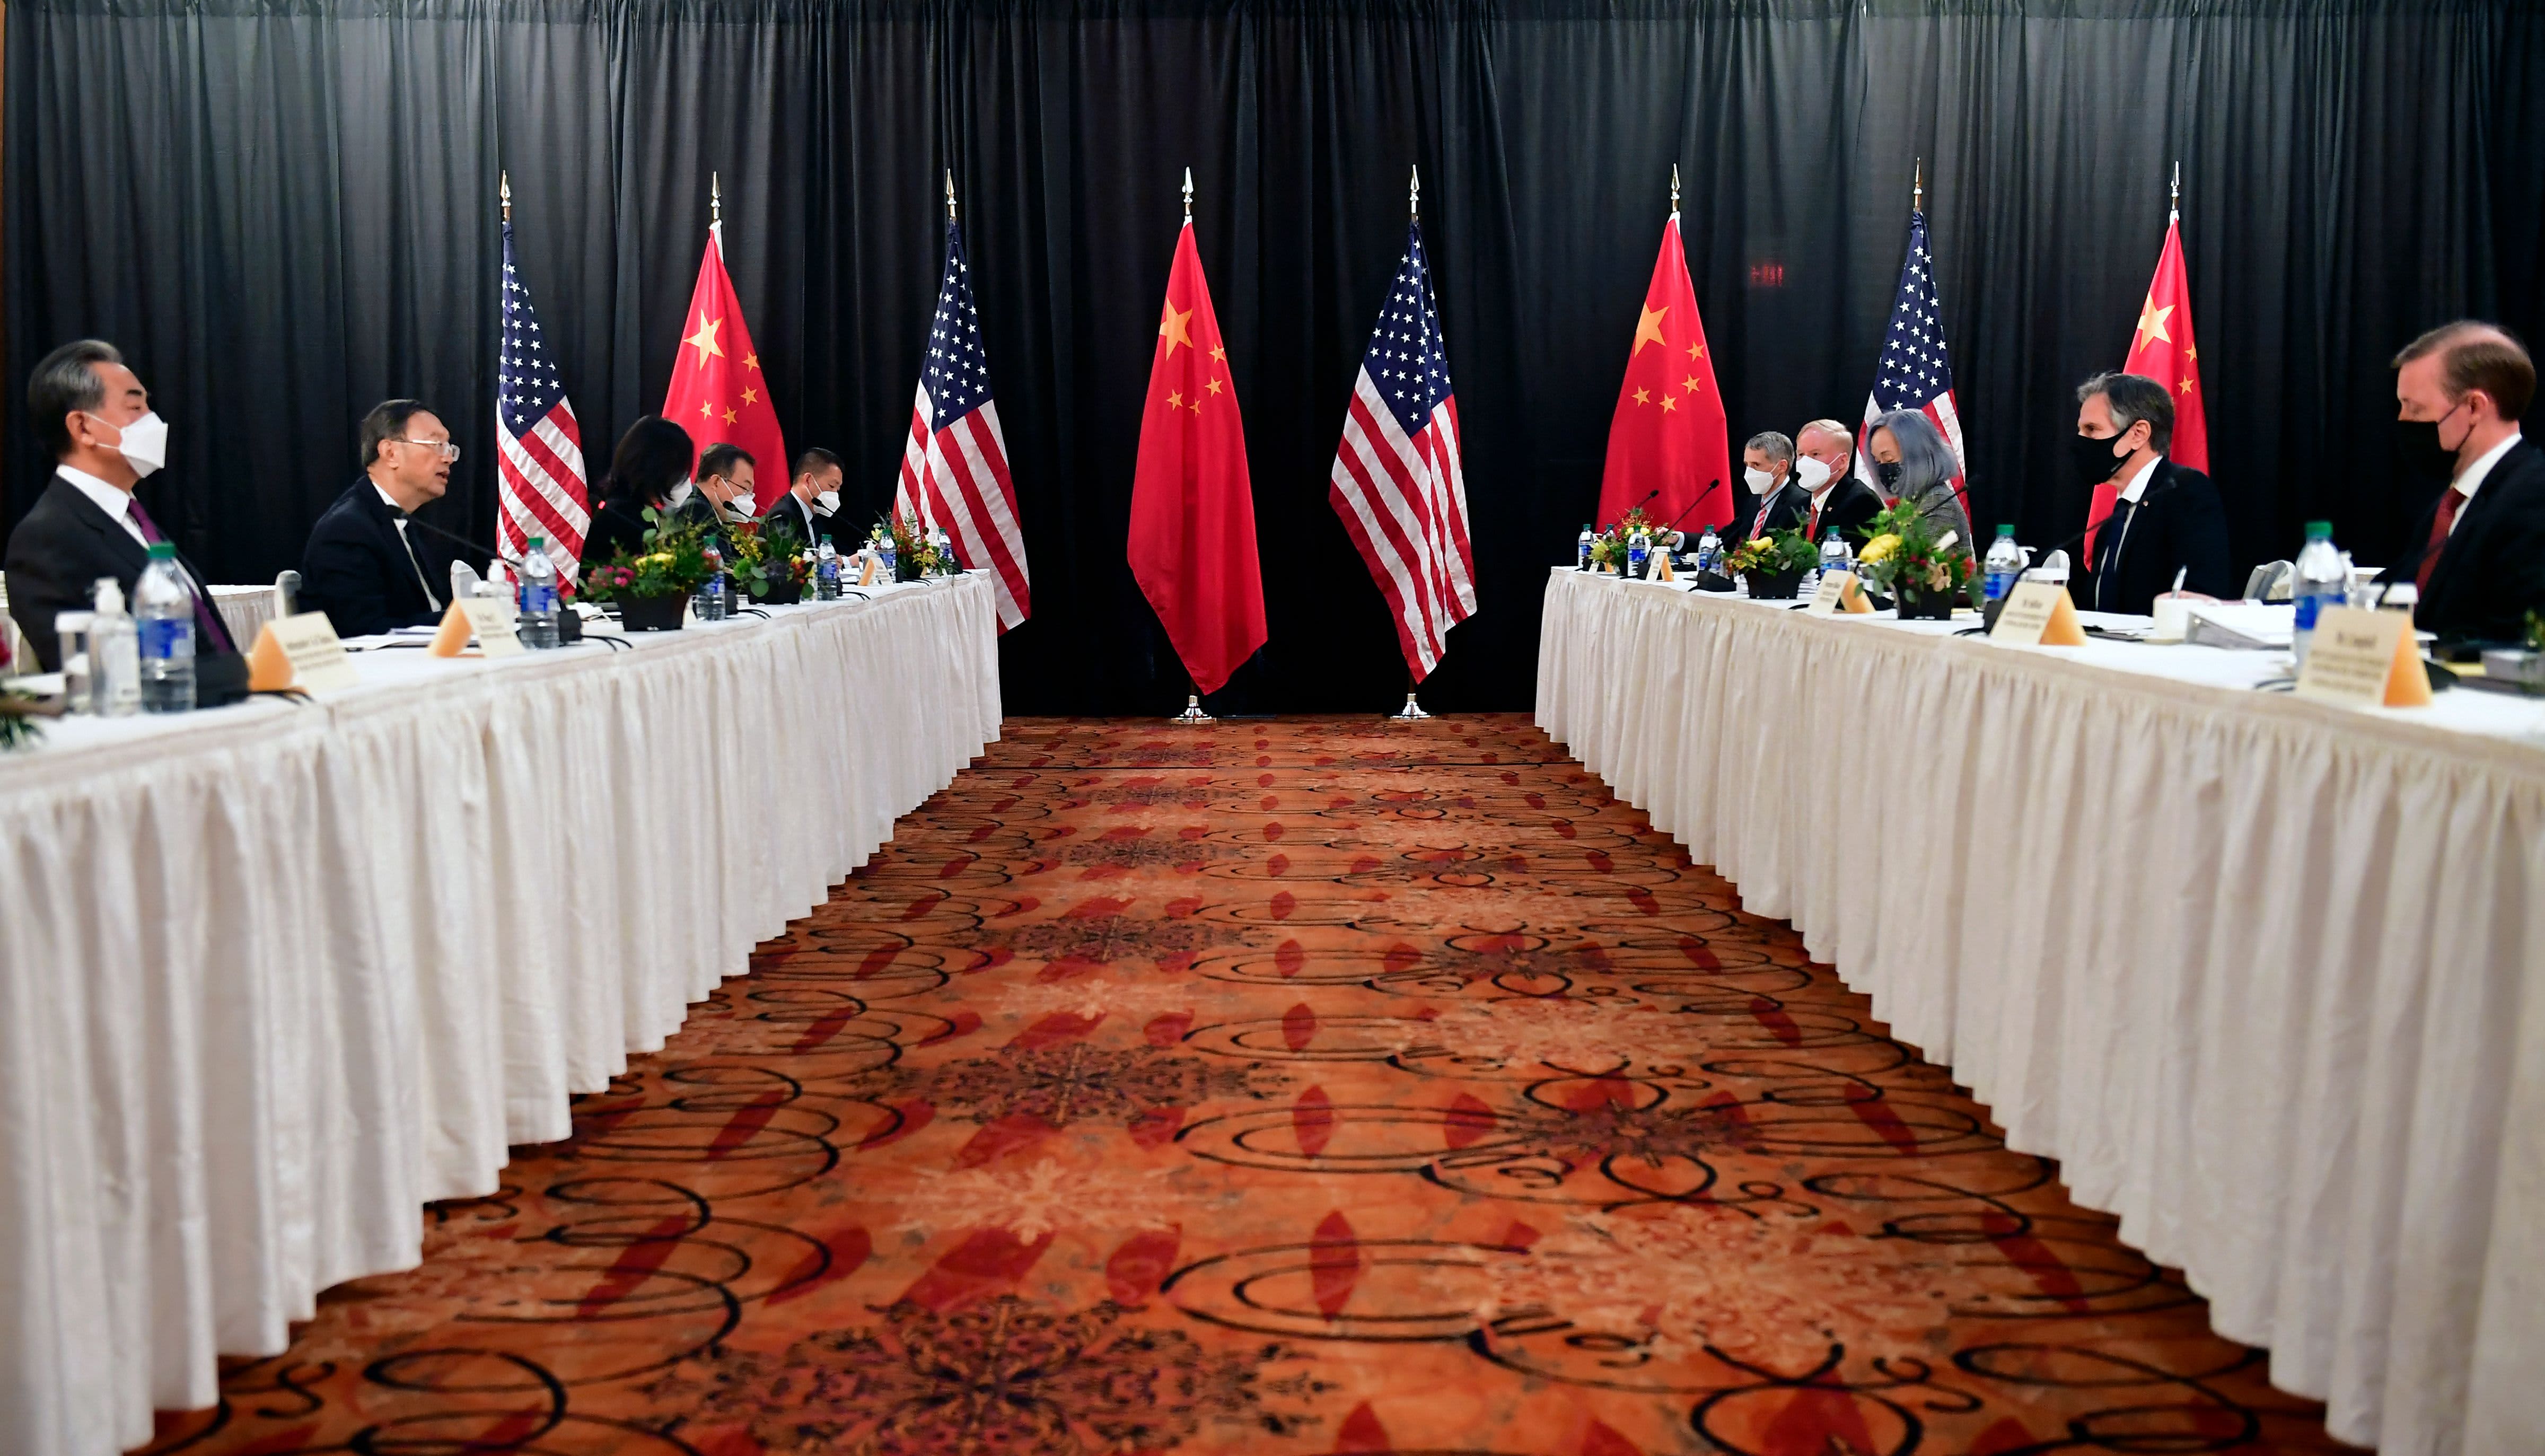 The first meeting between the US and China under Biden starts with difficulty